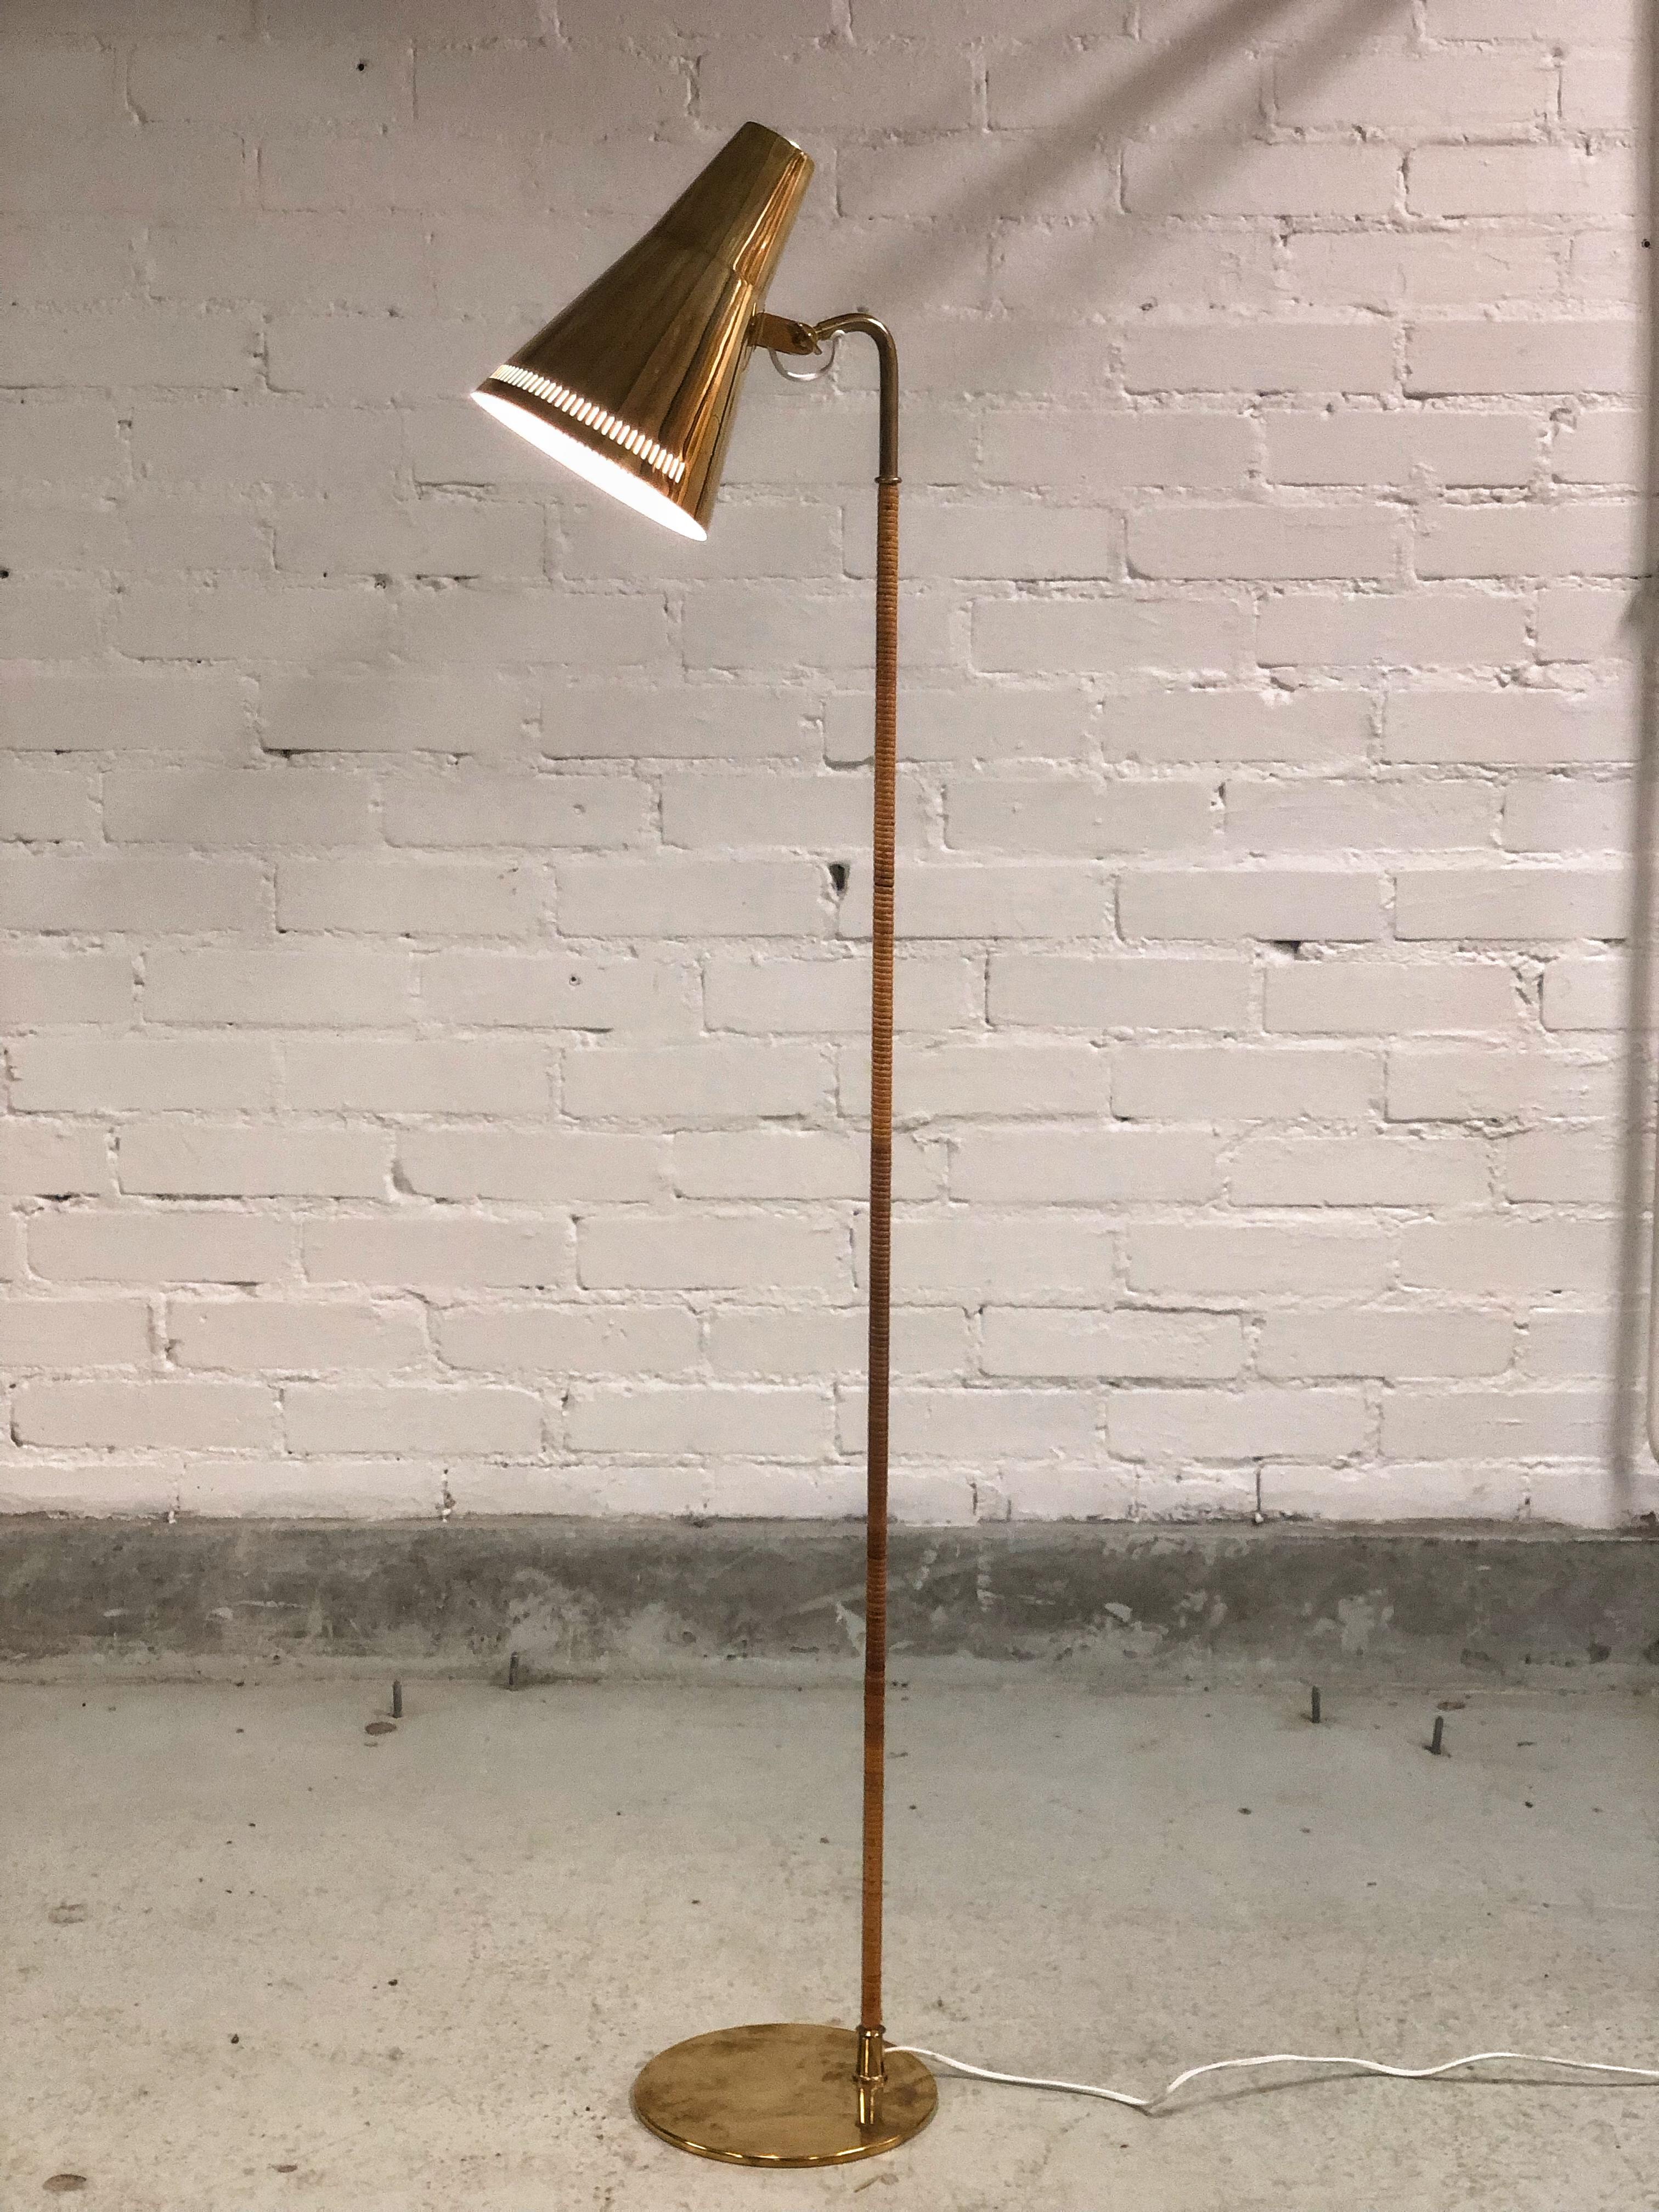 A gracefully slim floor lamp with a solid brass shade and a rattan wrapped stem. These lamps harmoniously combine the coldness of brass and natural warmth of rattan to create a design that can enhance the finest of interiors, private or public.

We